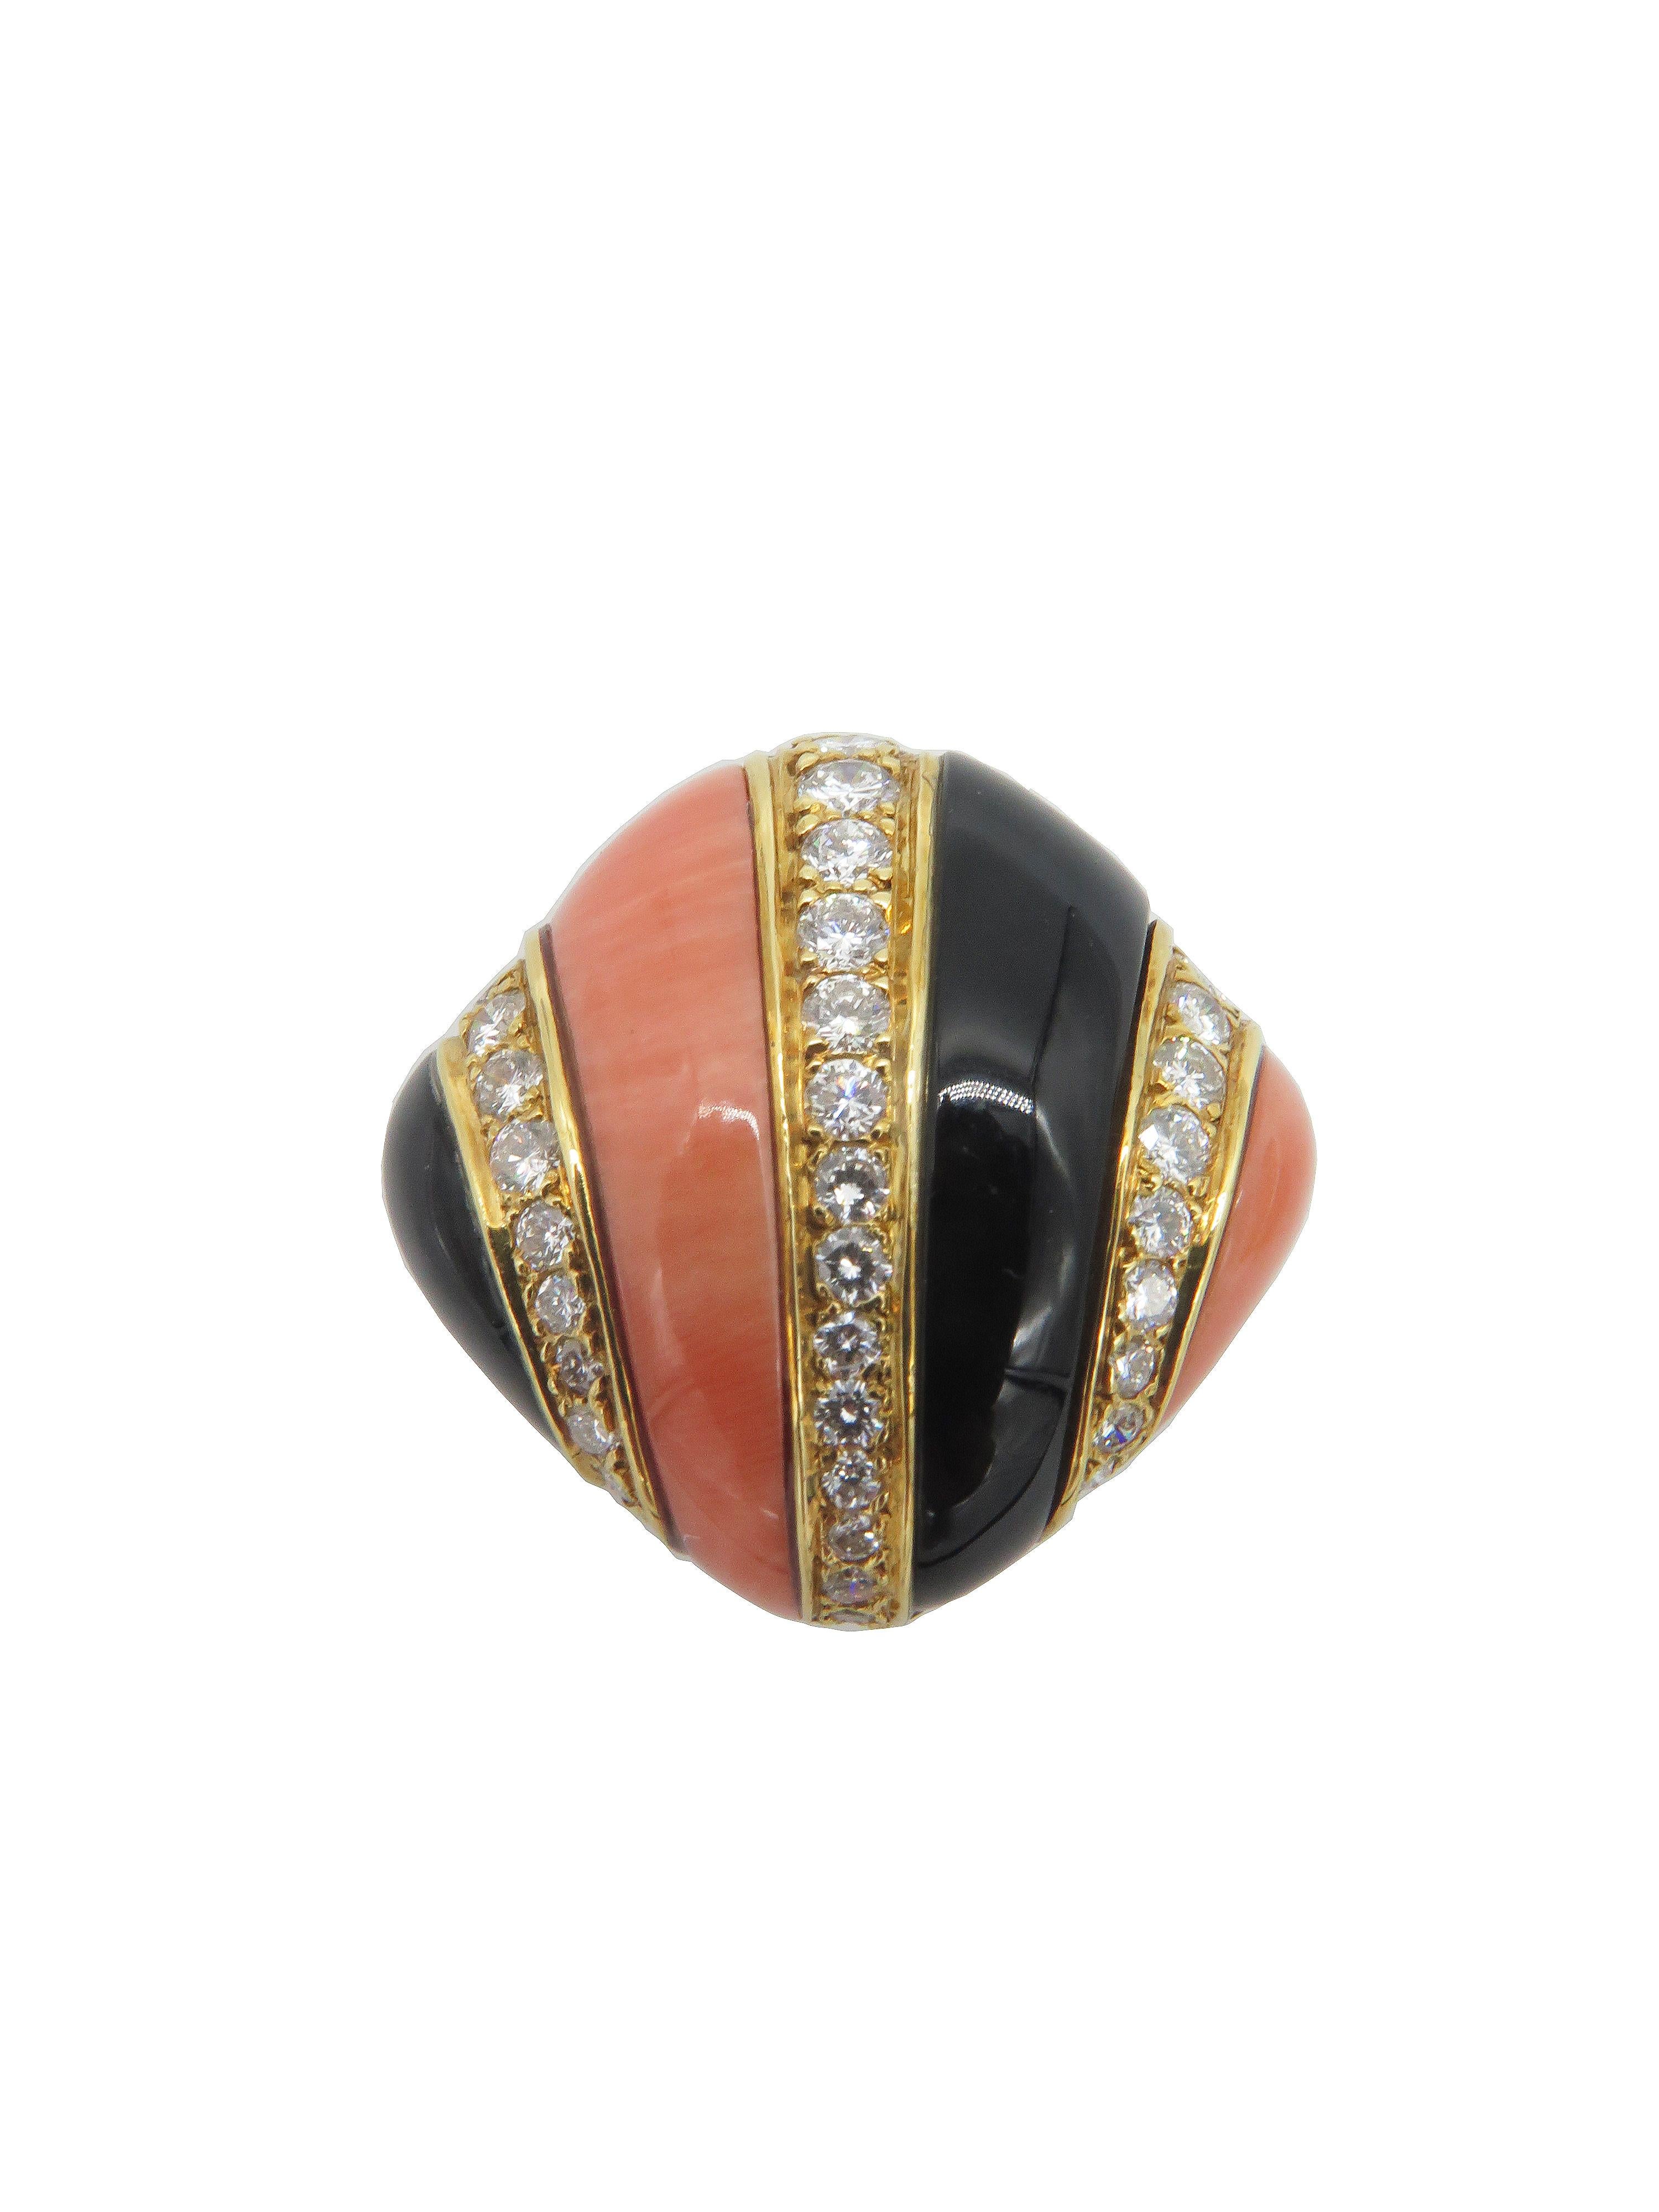 Charles Turi Coral Onyx and Diamond 18 Karat Yellow Gold Earrings In Excellent Condition For Sale In West Palm Beach, FL